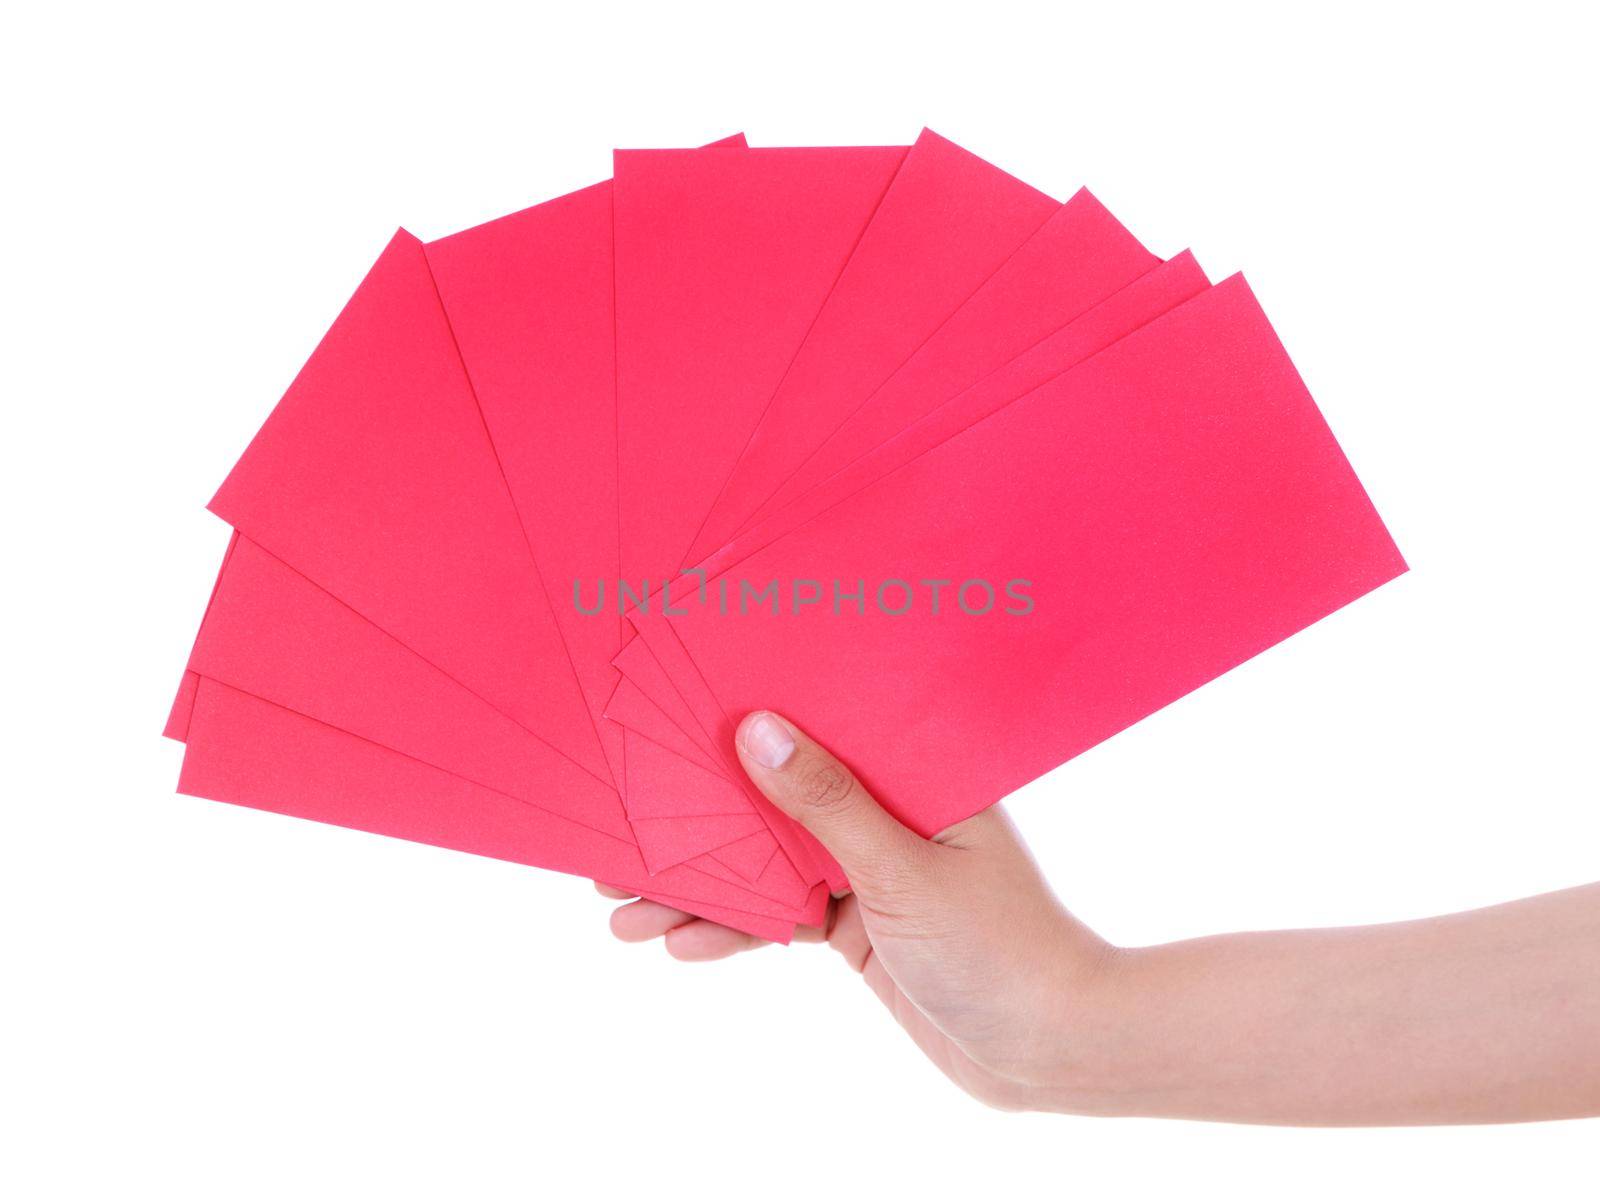 hand holding red envelope in concept of happy chinese new year isolated on a white background